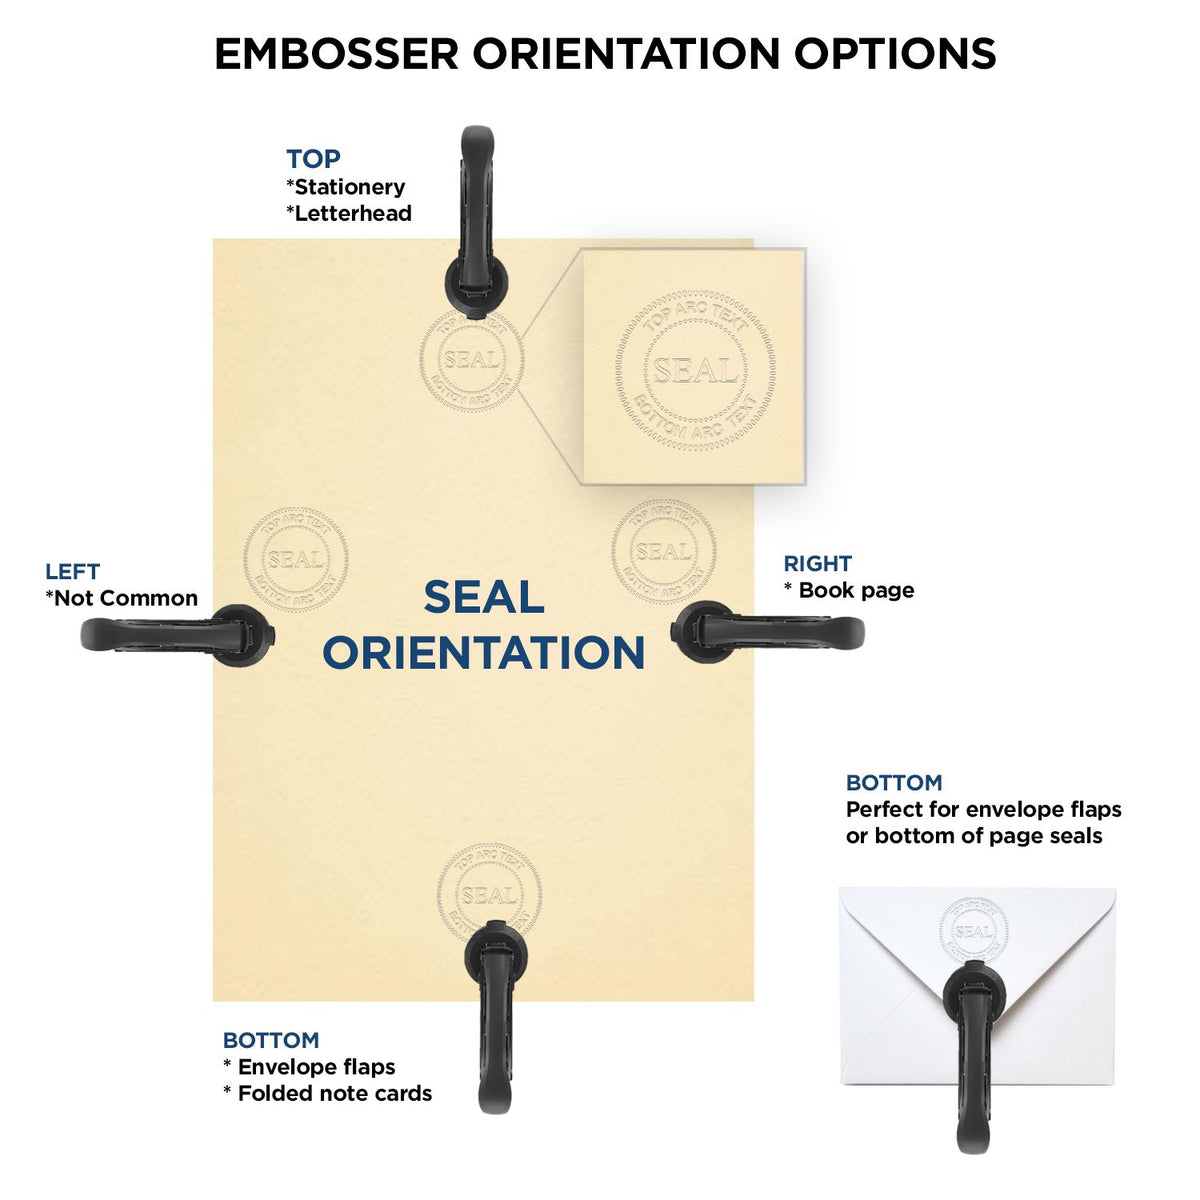 An infographic for the Gift Tennessee Engineer Seal showing embosser orientation, this is showing examples of a top, bottom, right and left insert.